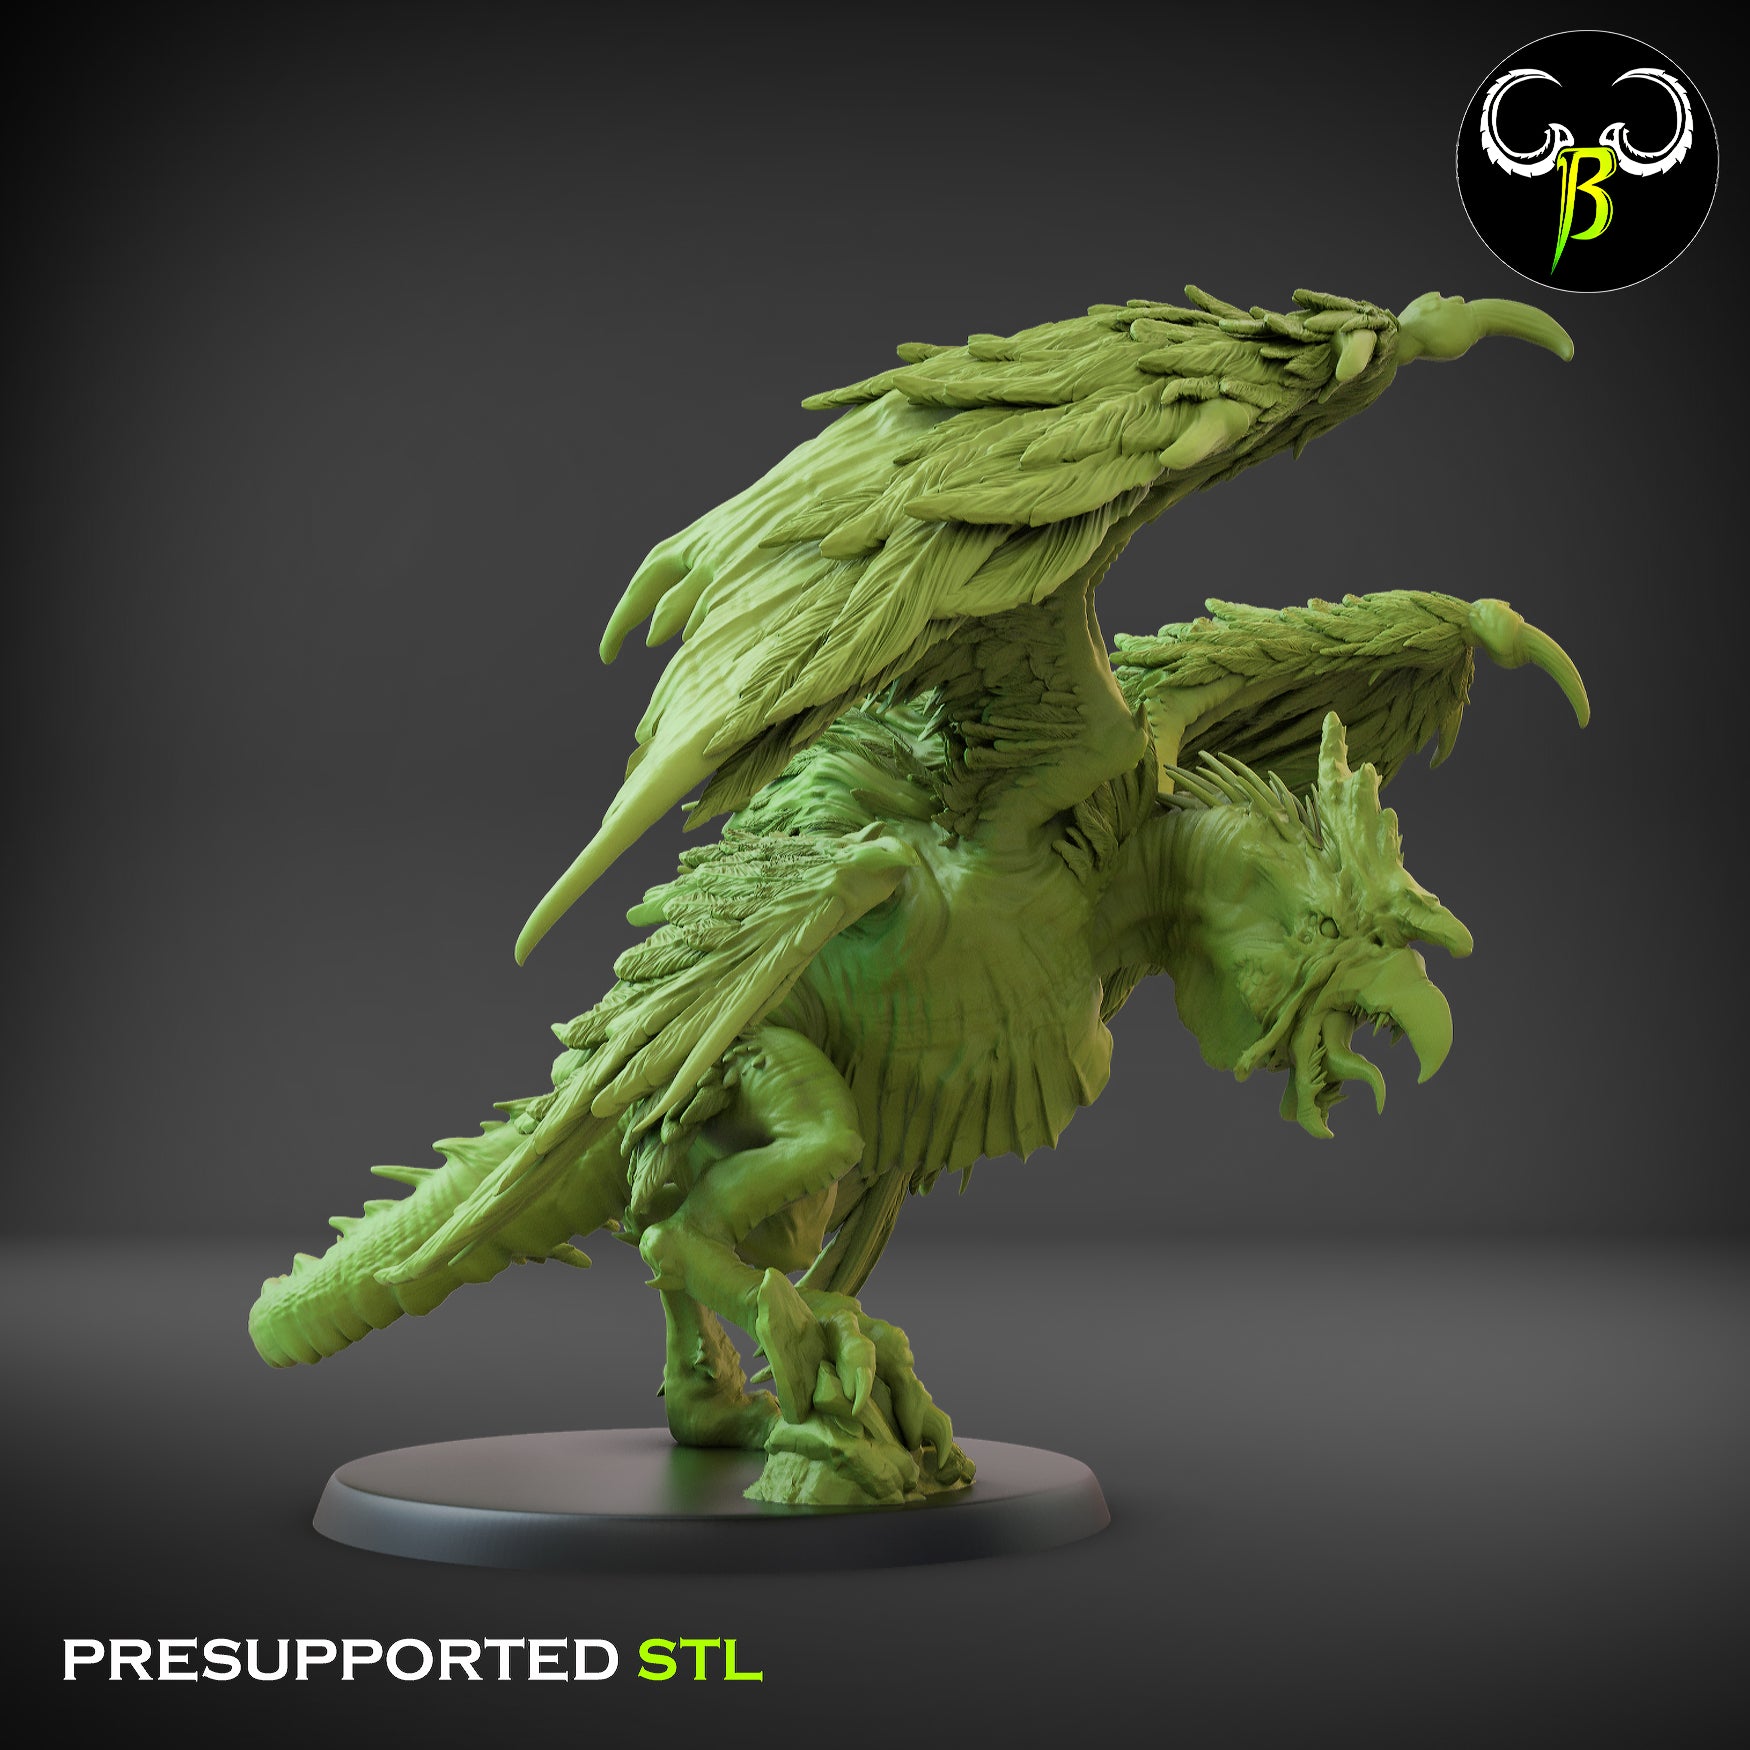 A detailed green 3D model of a fantasy creature with dragon-like features, including wings, a fierce beak, and clawed feet. Perfect for Dungeons and Dragons, the 3D printed miniature stands on a circular base against a dark background. Text reads: "PRESUPPORTED STL" and a logo appears in the top right corner. Chaos Catrice - Clay Beast Creations - 3d Print